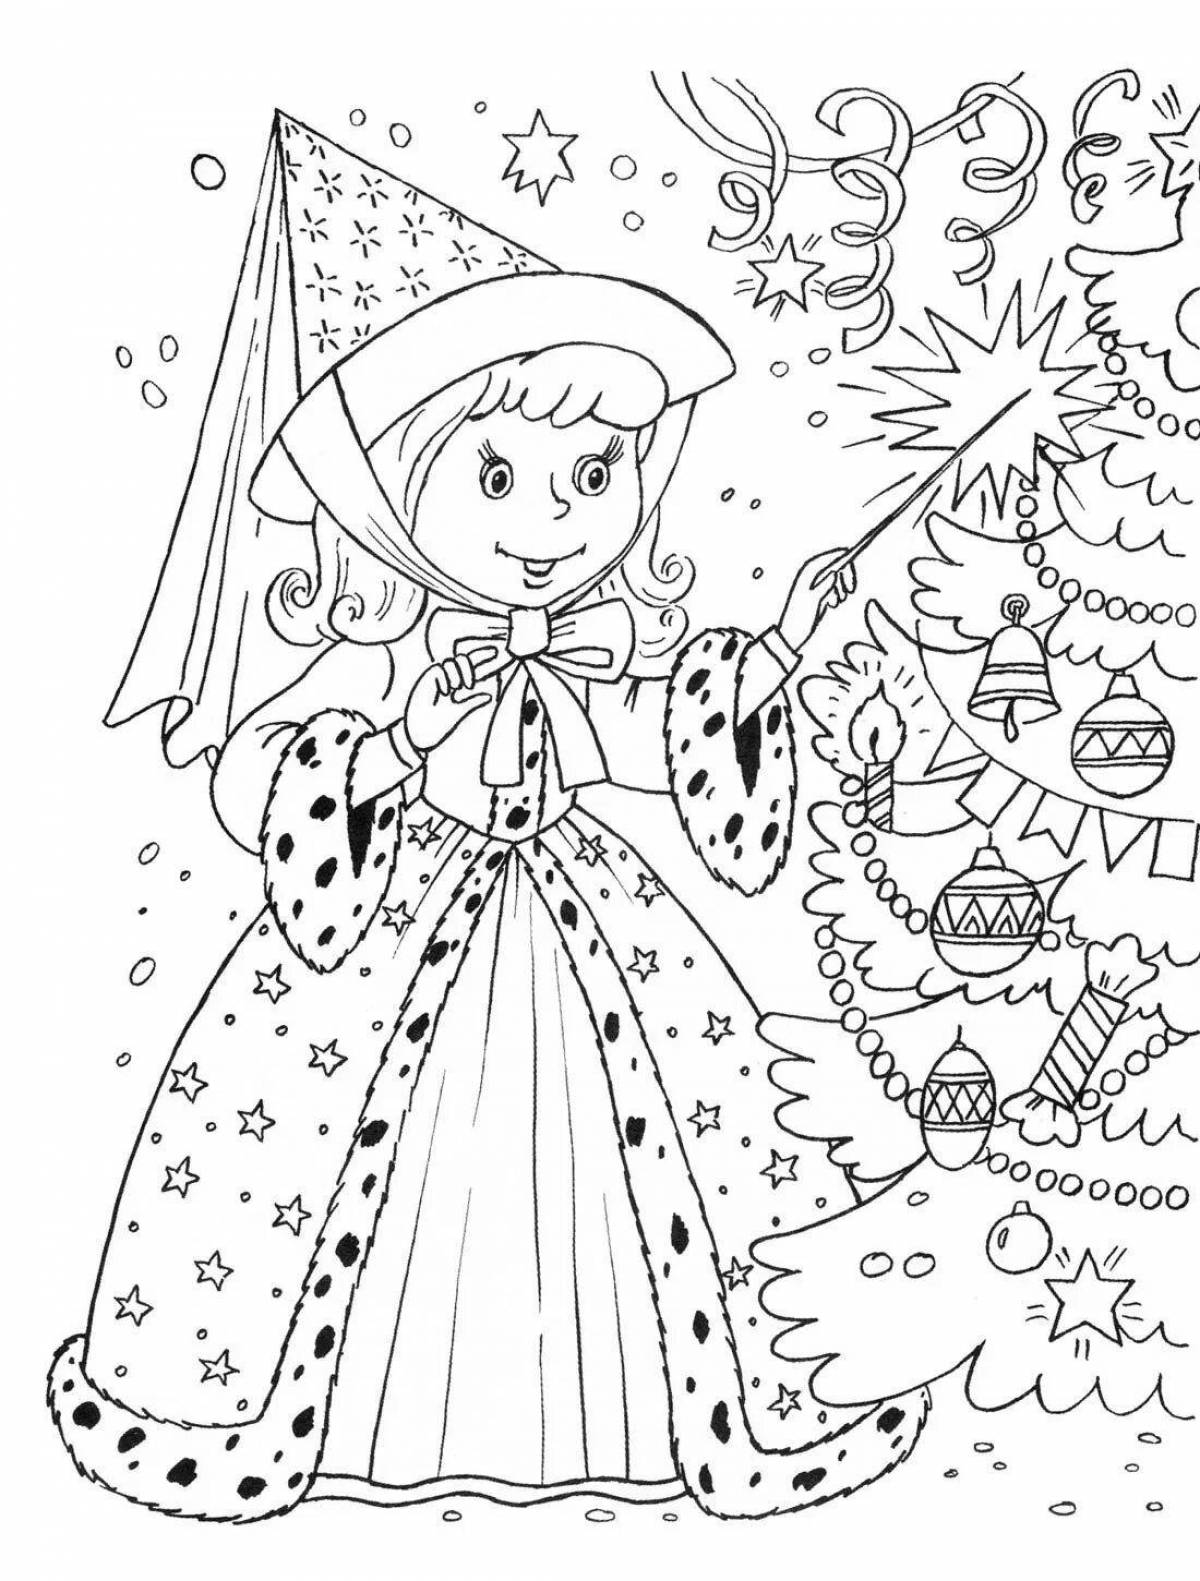 Radiant Christmas coloring book for girls 8 years old